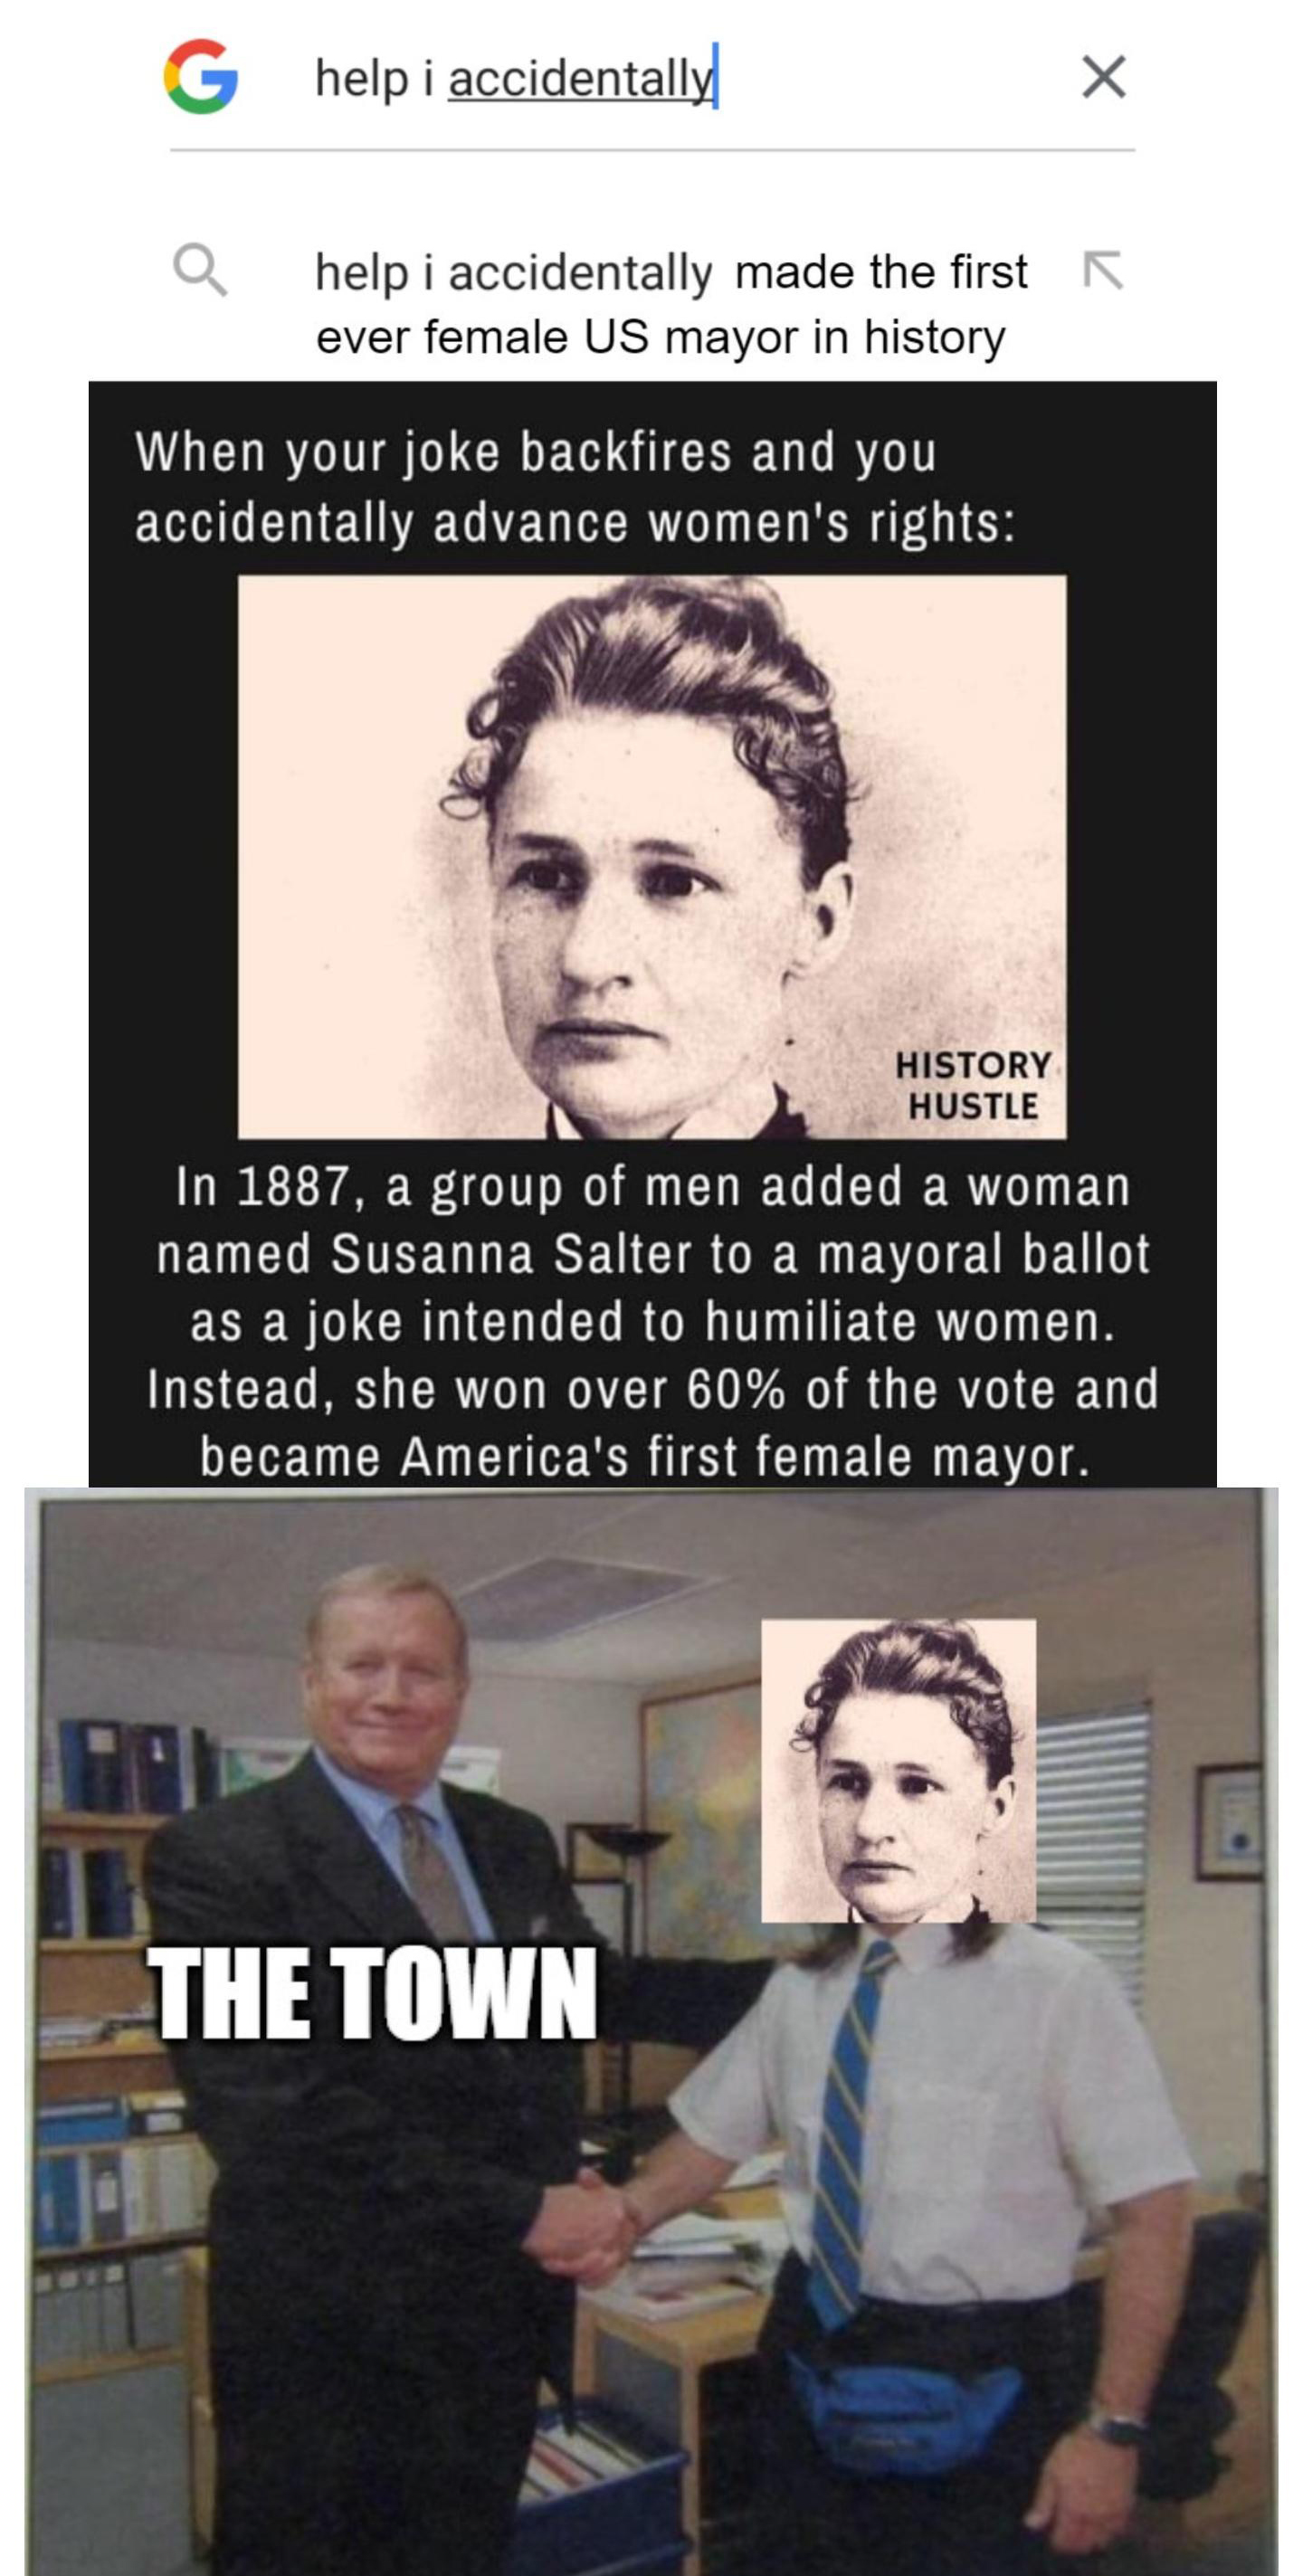 The Office memes - poster - Ghelpi accidentally! X help i accidentally made the first ever female Us mayor in history When your joke backfires and you accidentally advance women's rights History Hustle In 1887, a group of men added a woman named Susanna S